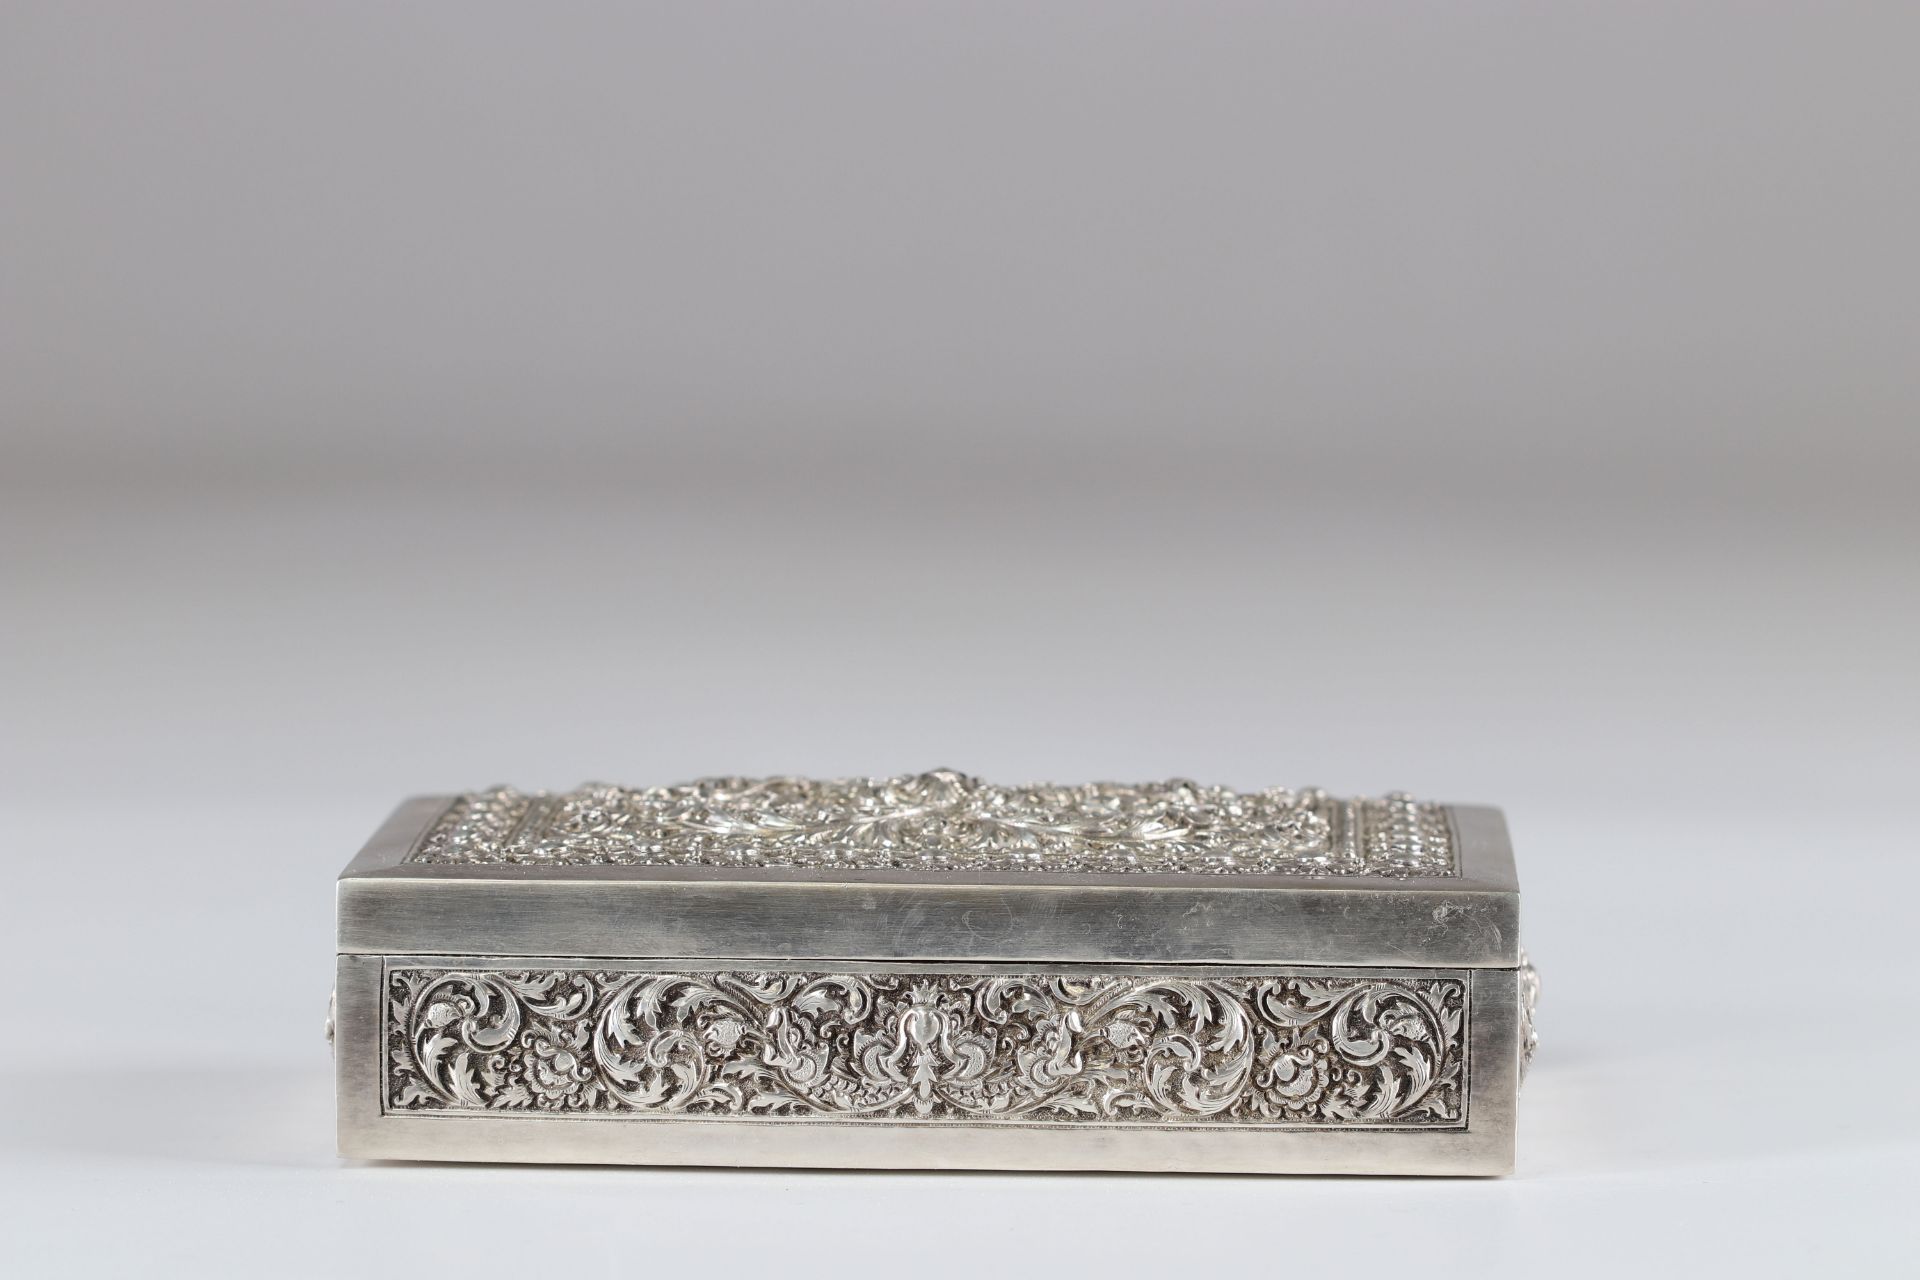 Cambodia silver box finely carved early 20th century - Image 2 of 3